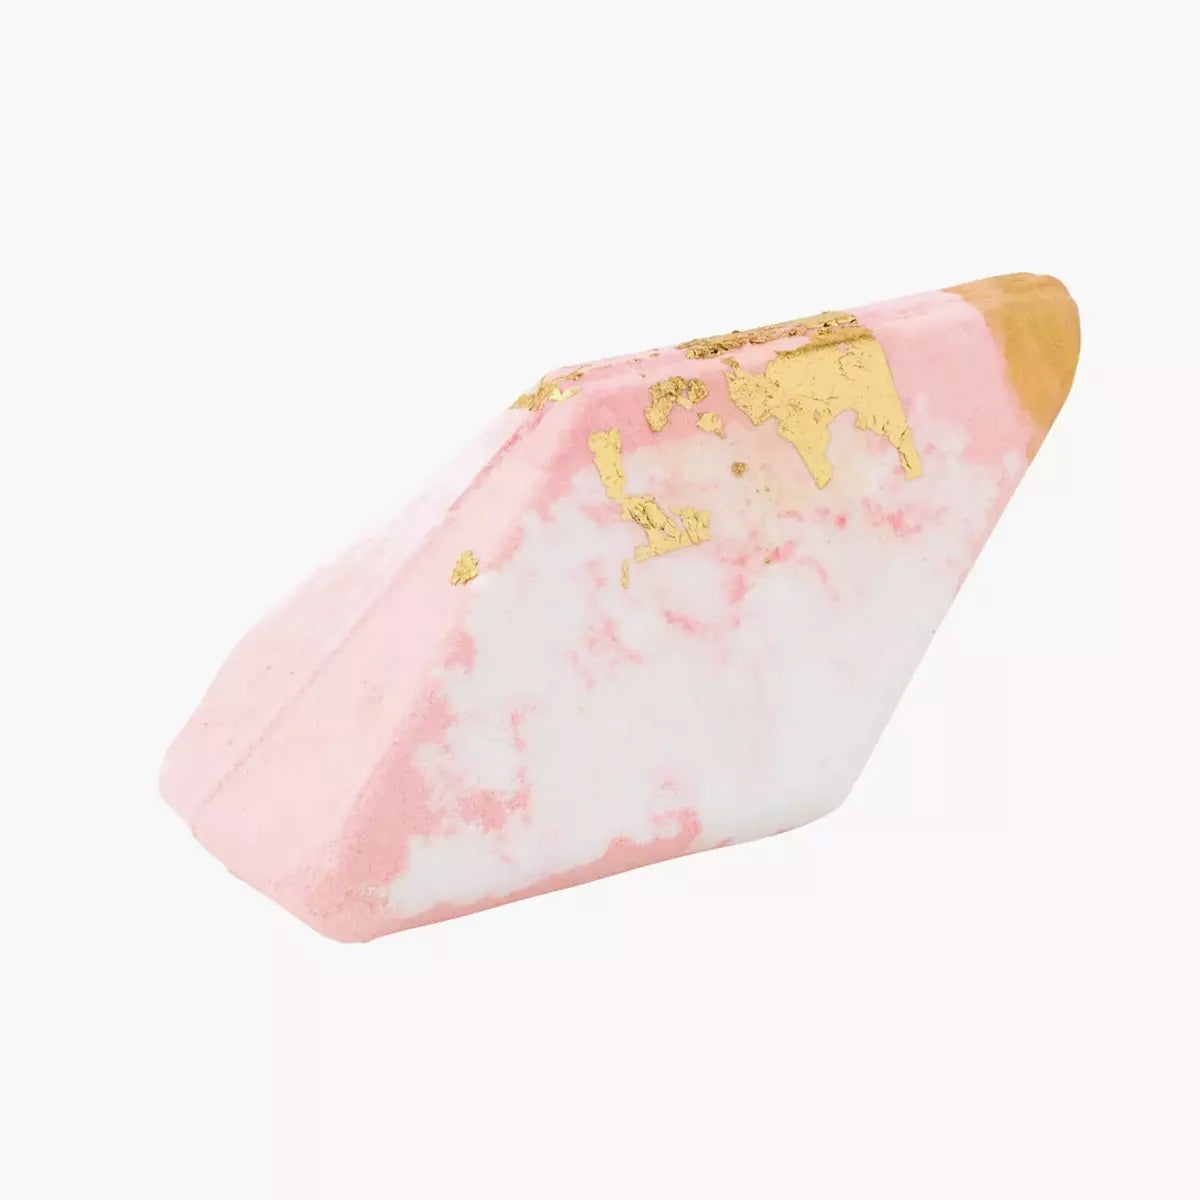 A Crystal Bath Bomb - Rose Quartz - Jasmine infused with Summer Salt Body's Jasmine essential oils, perfect for nourishing the skin. Placed on a white surface, it creates a luxurious ambiance.